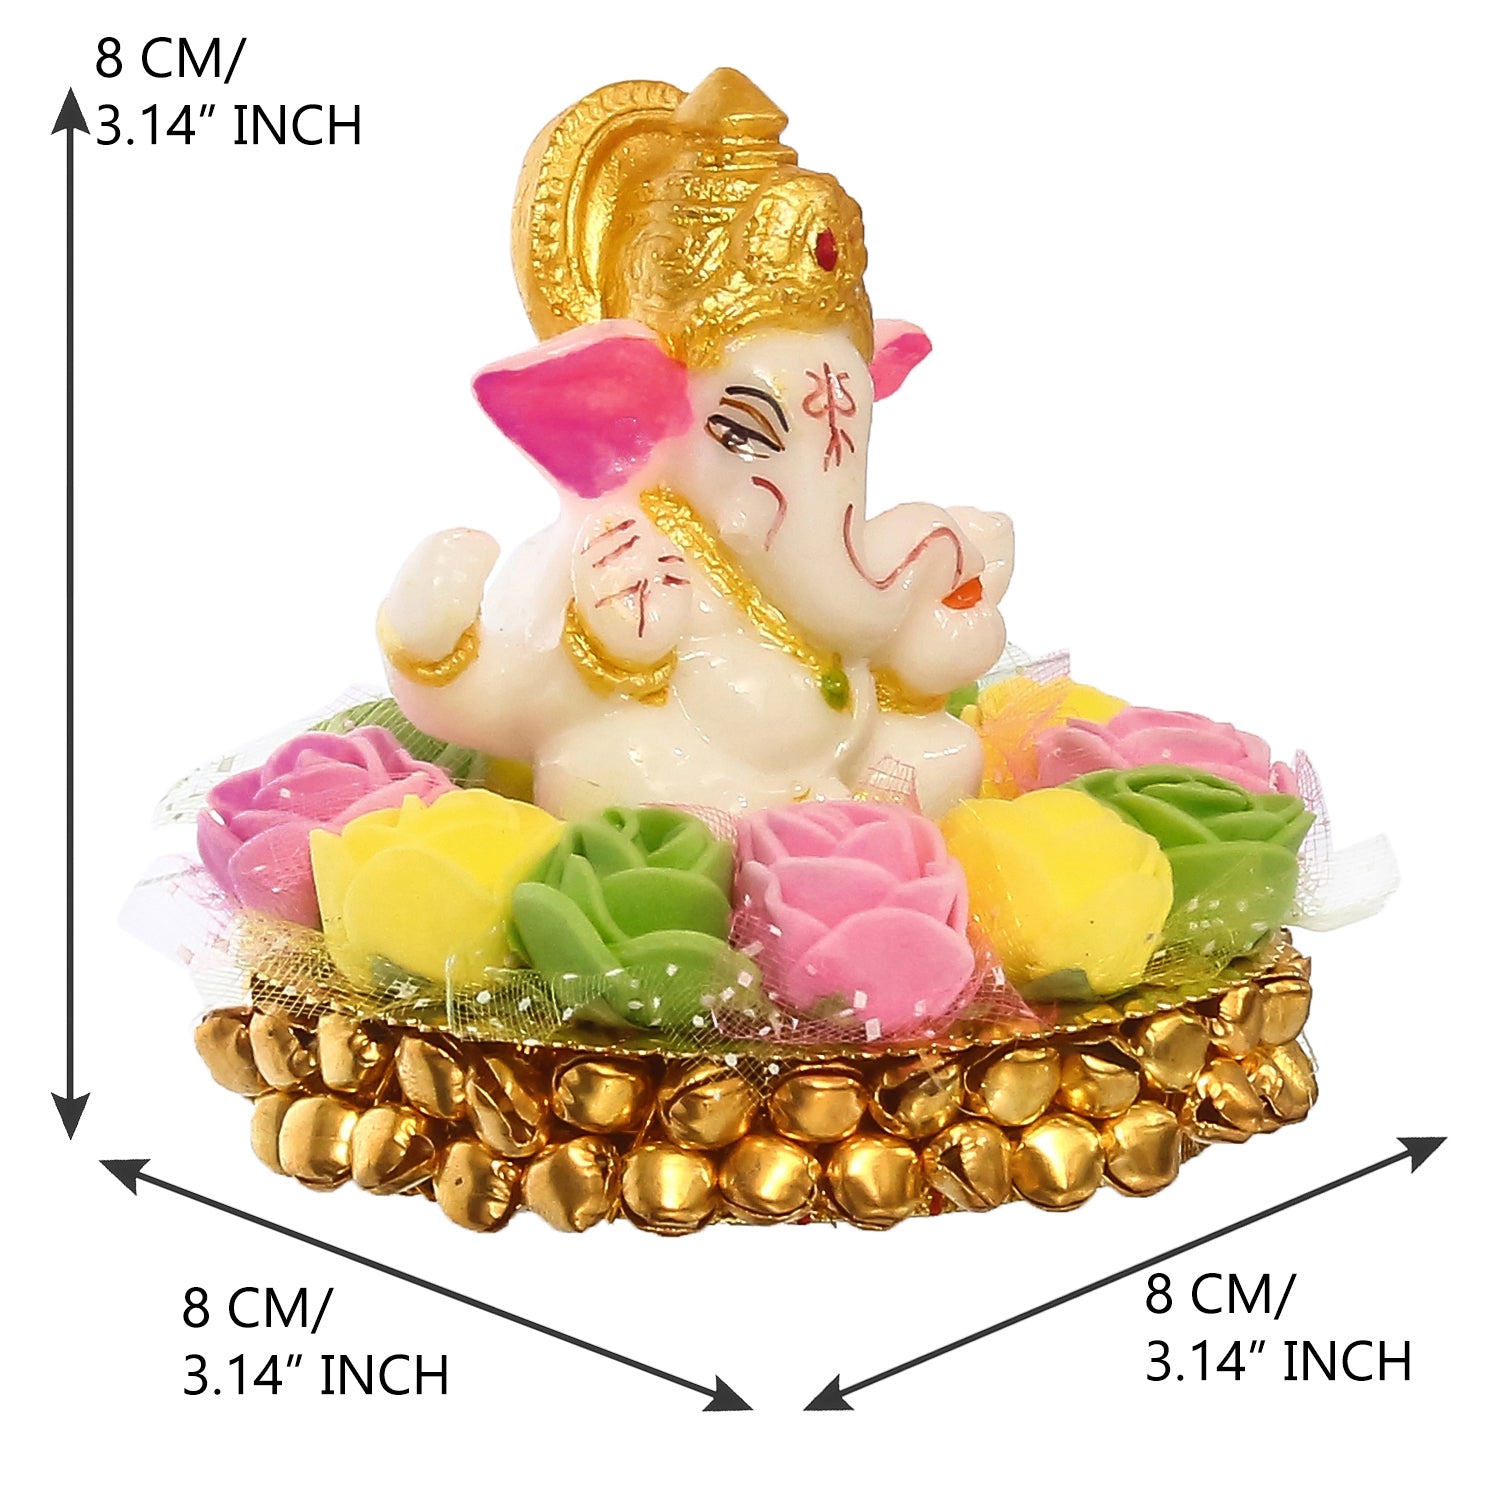 Polyresin Lord Ganesha Idol on Decorative Handcrafted Plate with Colorful Flowers 3